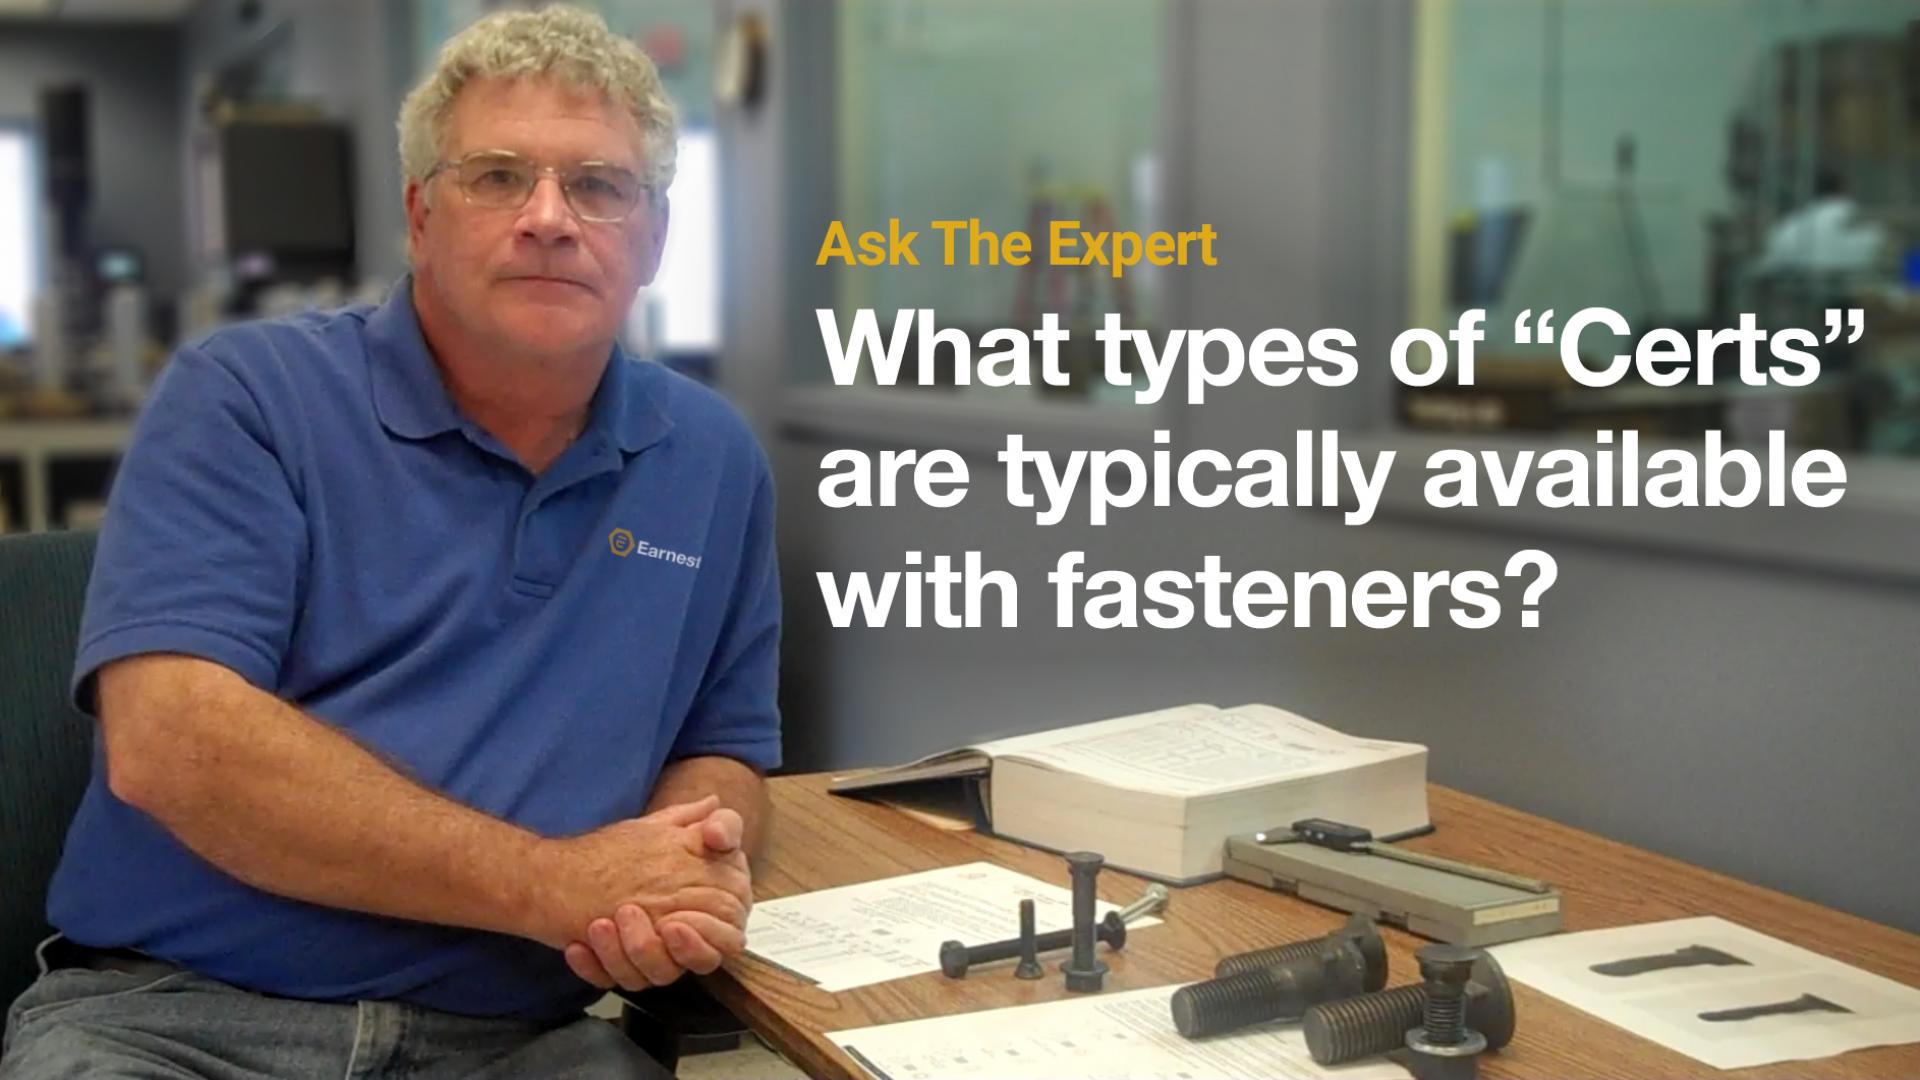 Question: What types of “Certs” are typically available with fasteners?